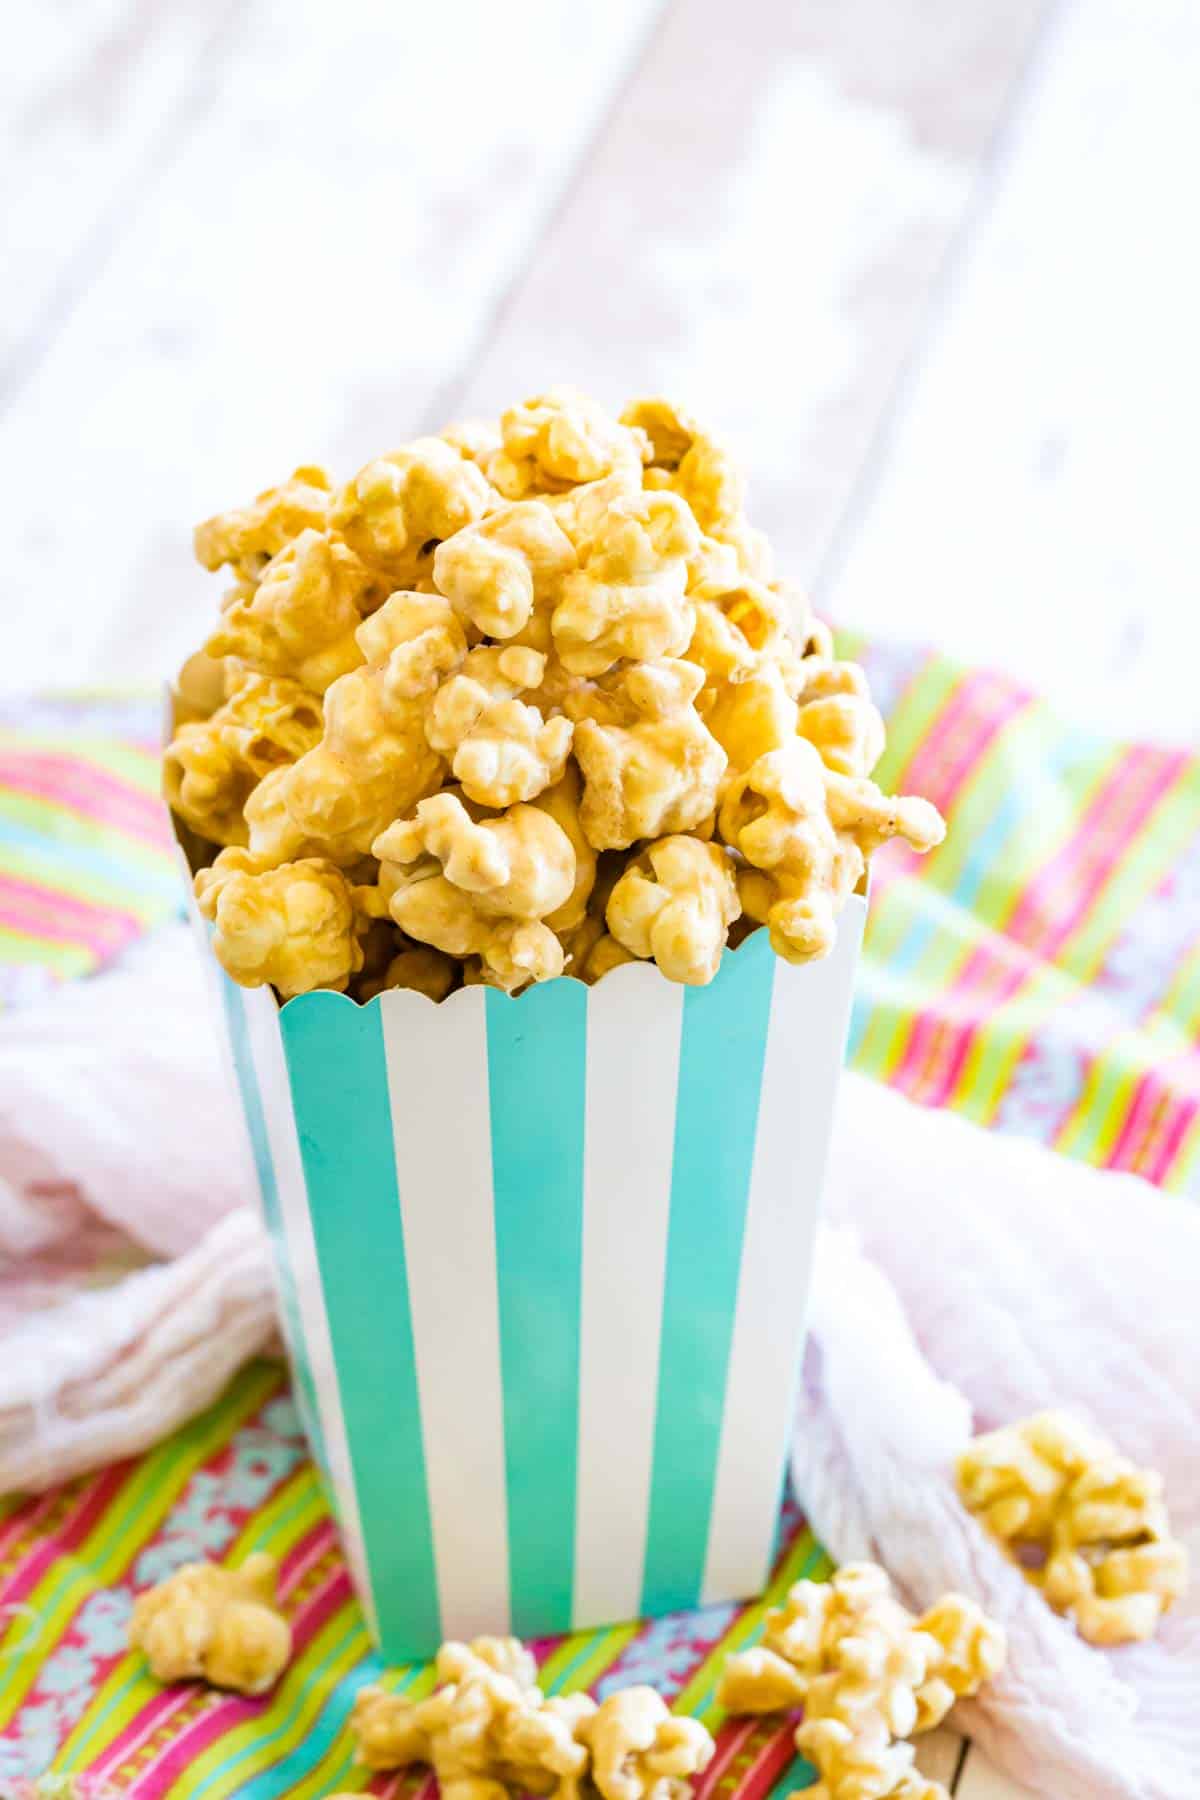 Peanut butter butterscotch popcorn is shown in a blue and white striped container.